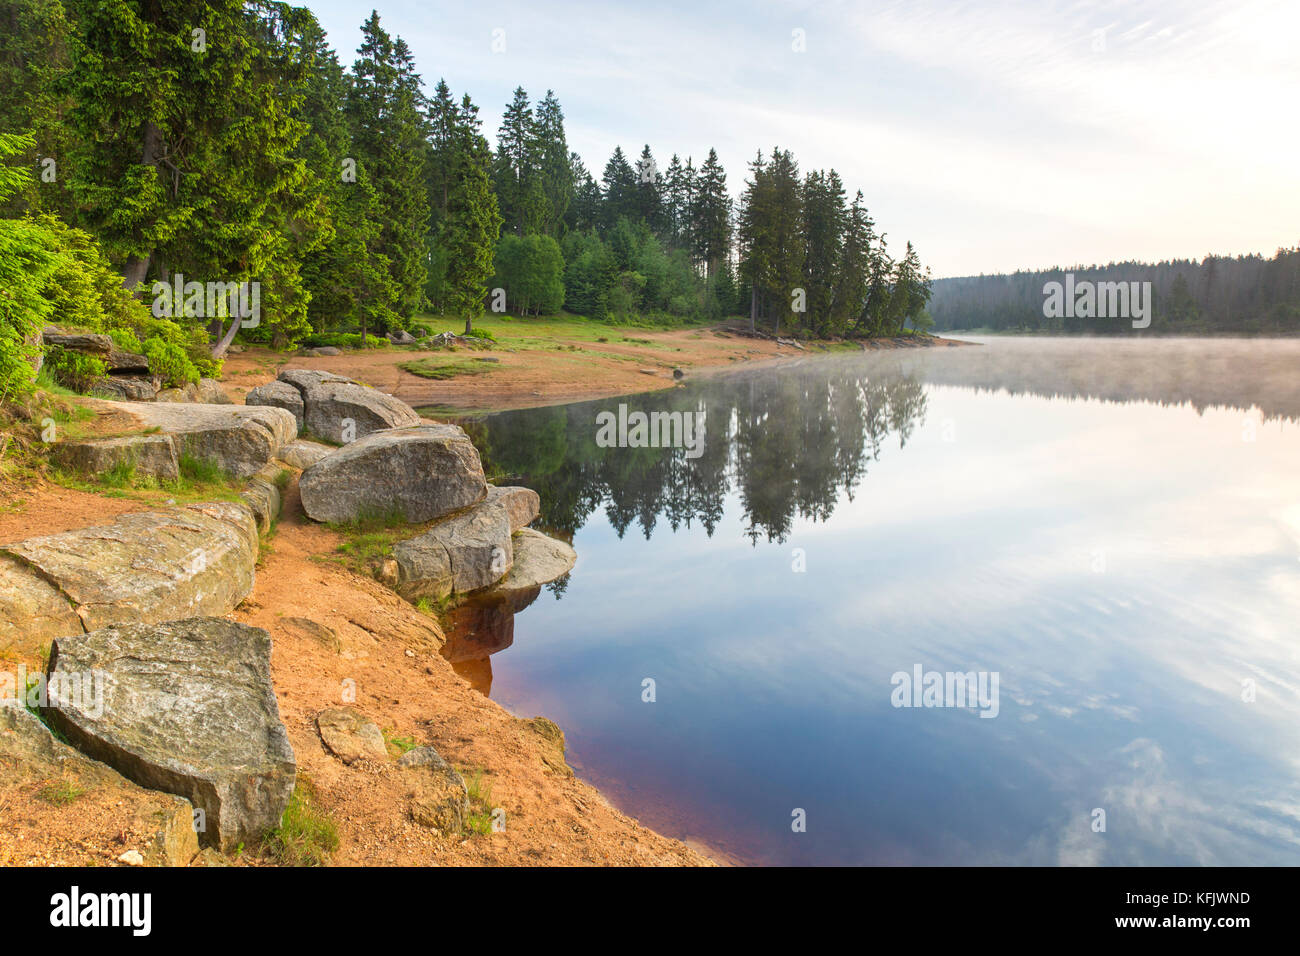 Oderteich, historic reservoir near Sankt Andreasberg in the Upper Harz National Park, Lower Saxony, Germany Stock Photo